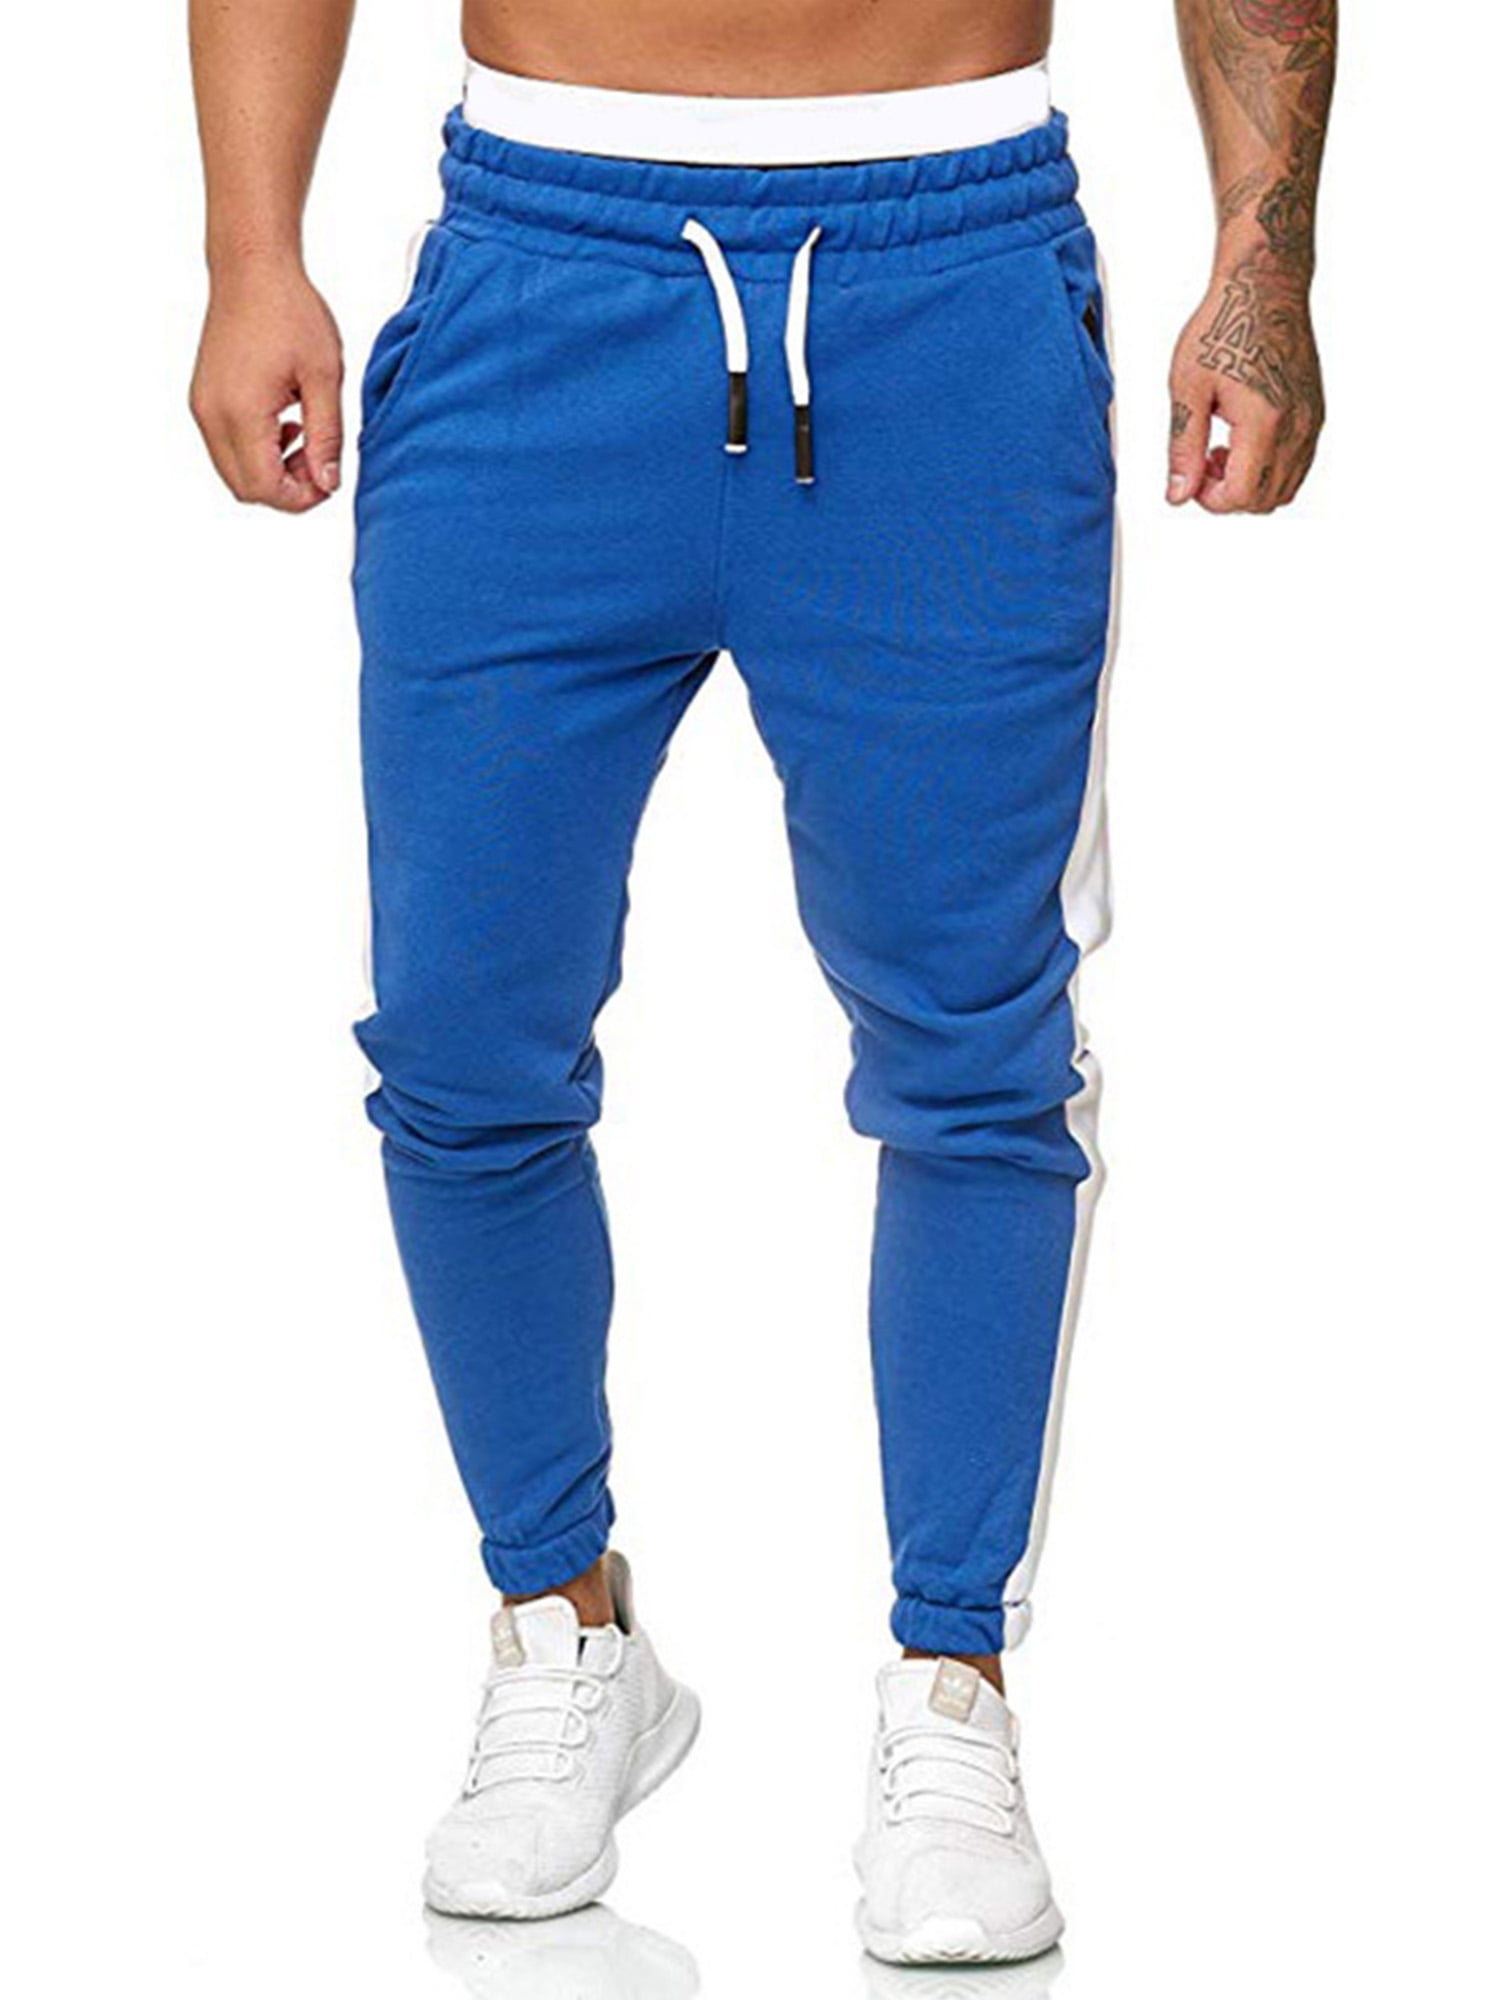 Avamo Mens Slim Fit Tracksuit Bottoms Skinny Jogging Joggers Sweatpants  Sweat Pants Trousers with Pockets 